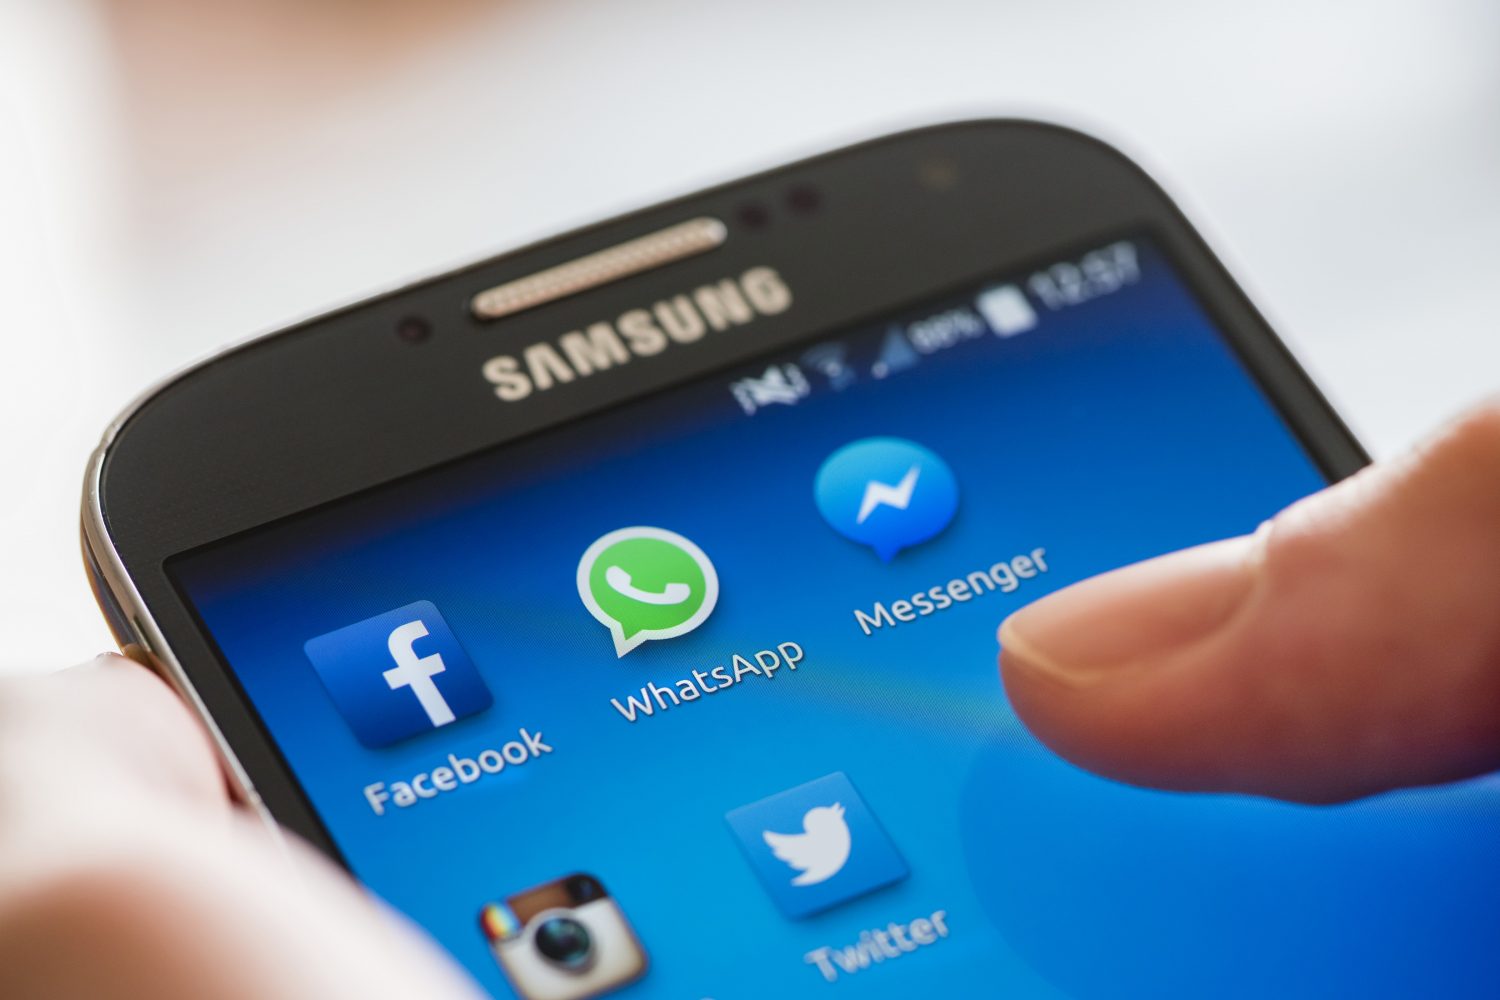 Icon of Facebook, WhatsApp, and Messenger (Facebook's proprietary messaging app) alongside other social media apps on a Samsung Galaxy smartphone's touchscreen. (Erik Tham/Getty Images)